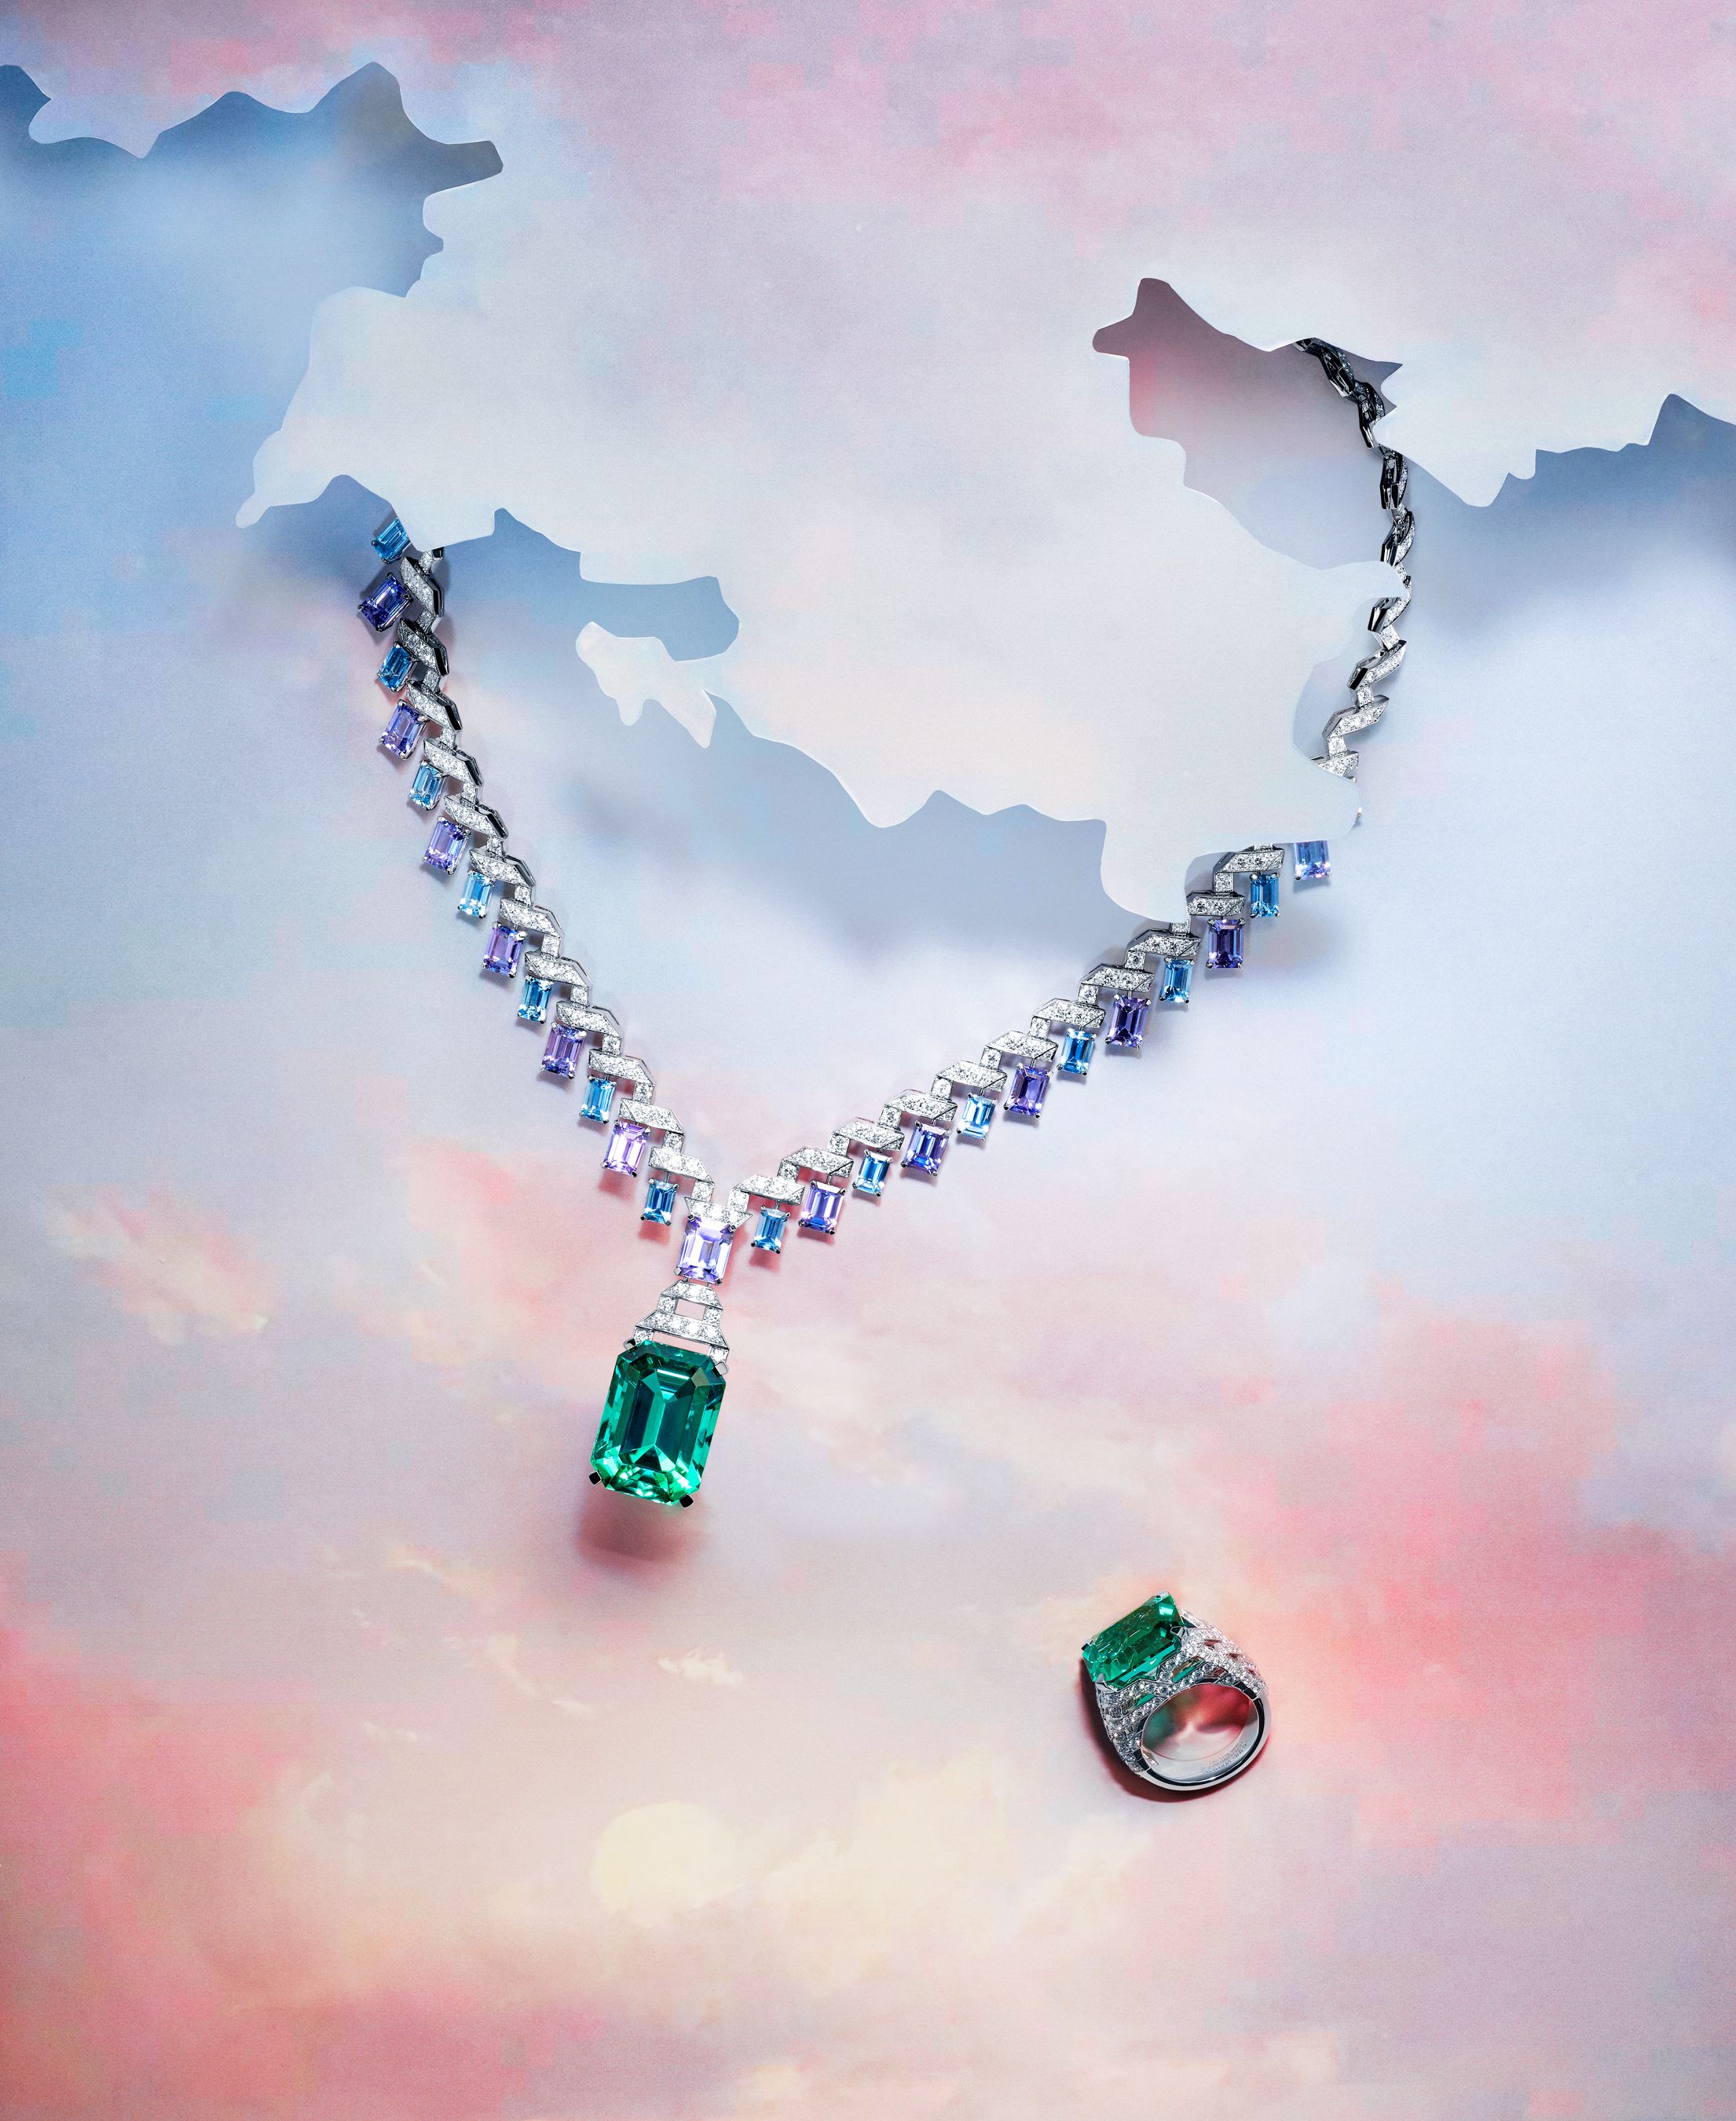 Louis Vuitton's newest high jewelry collection celebrates space exploration  - Luxurylaunches